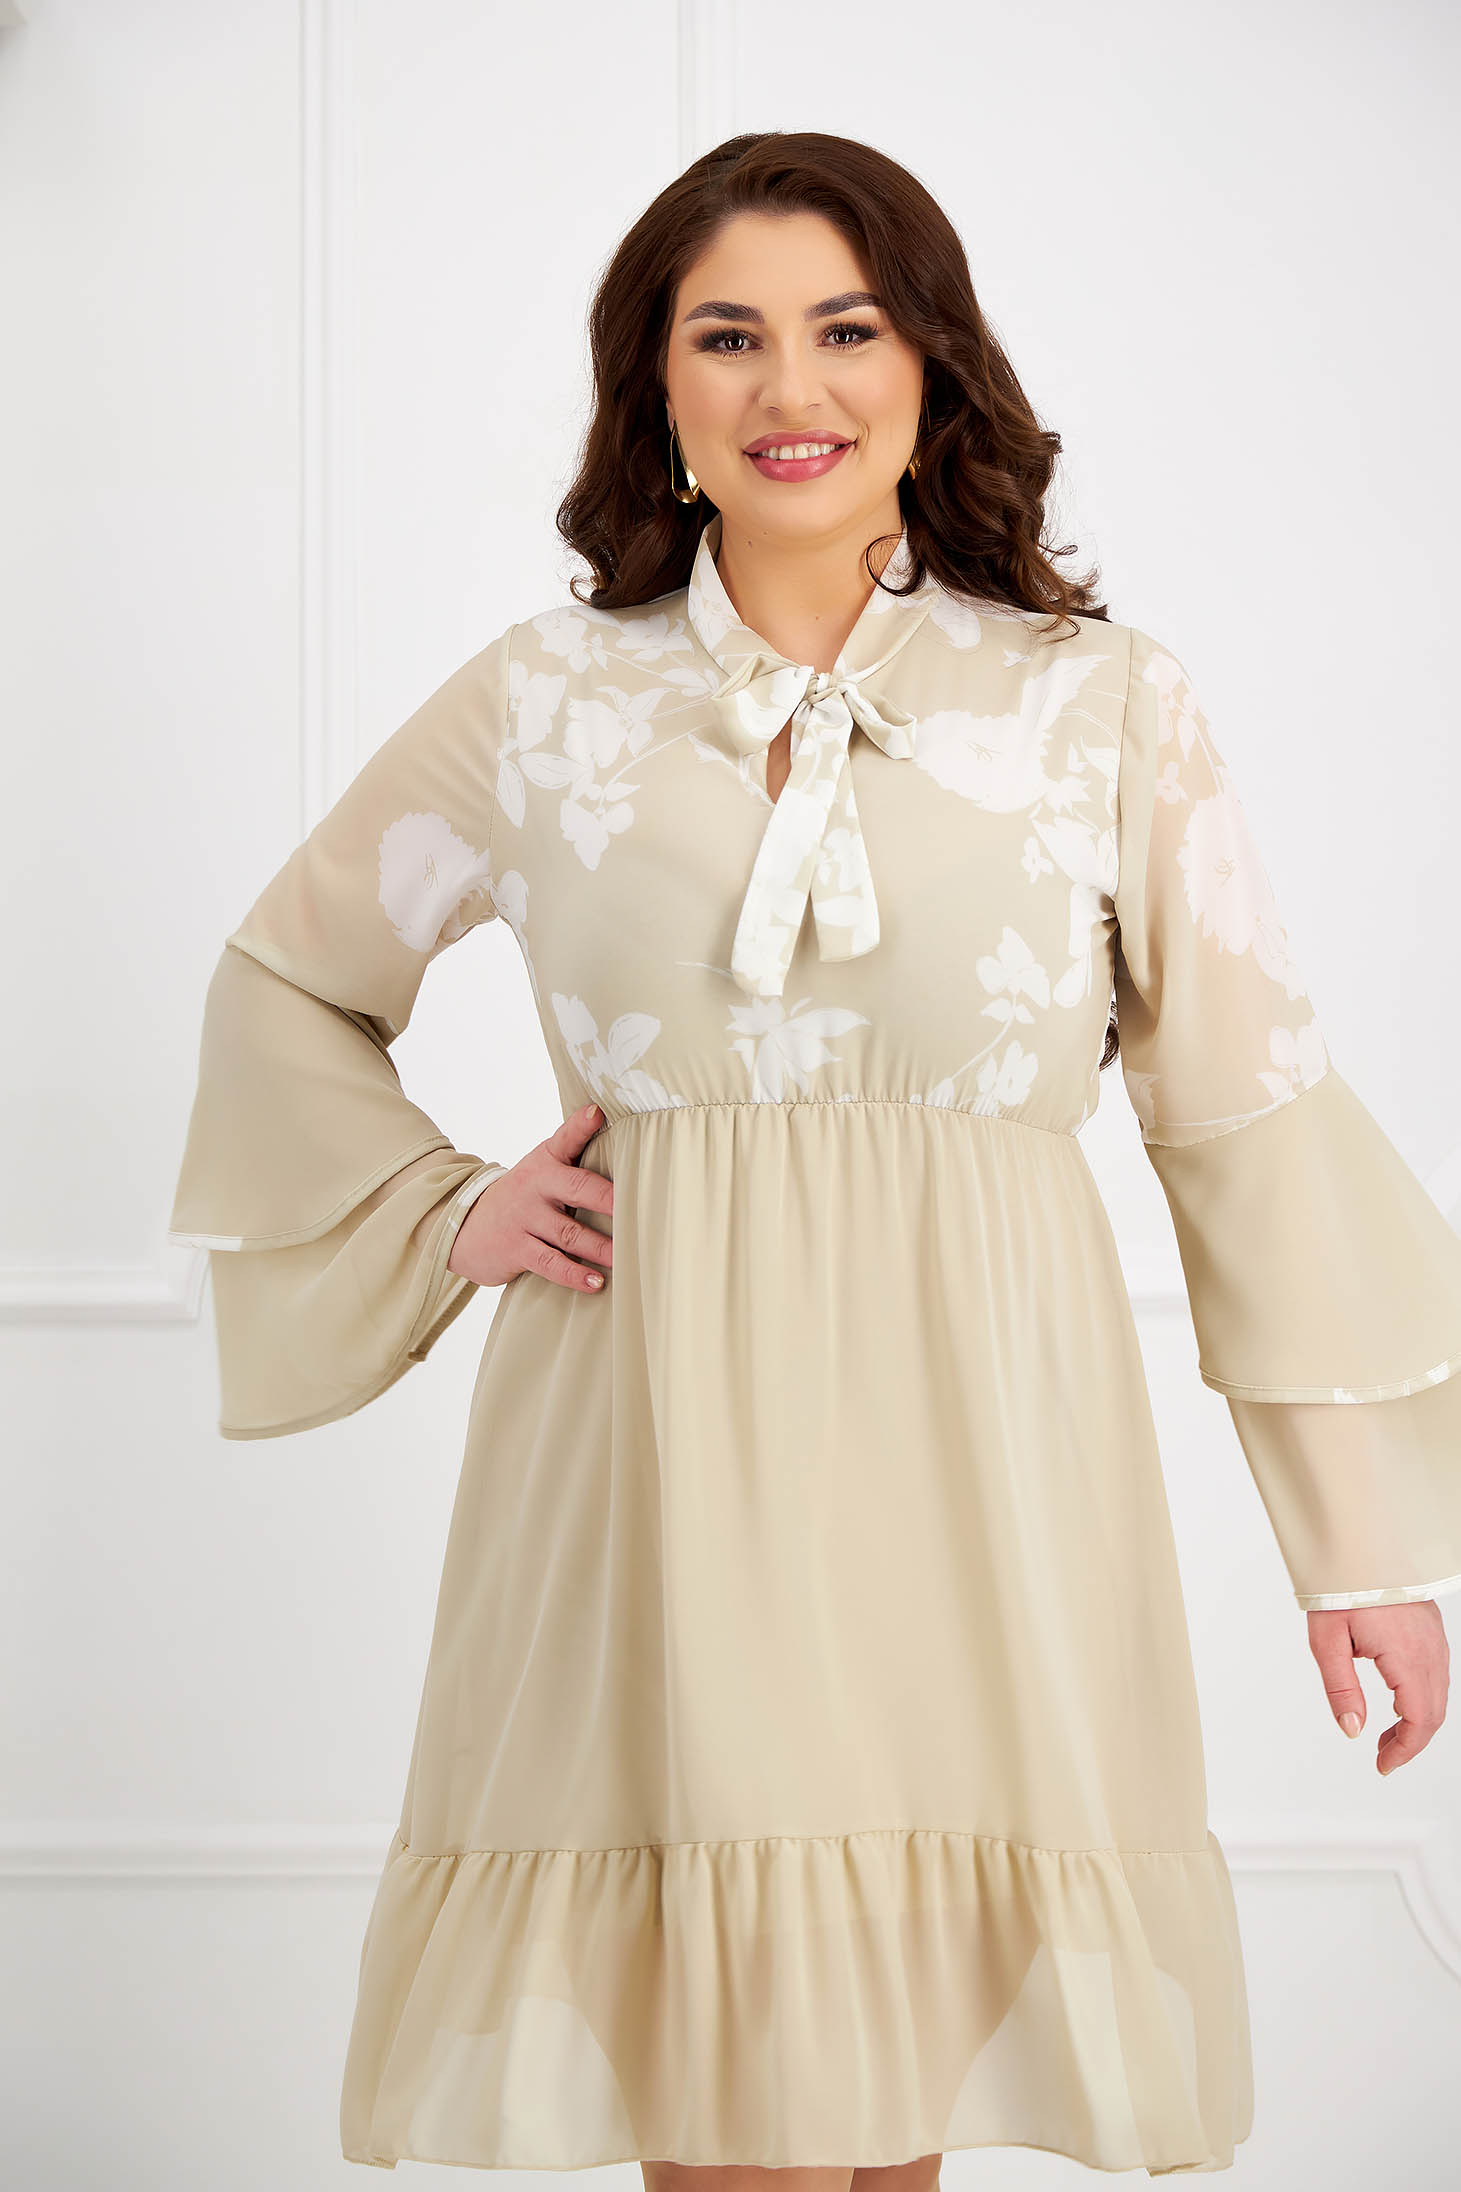 Cream dress from veil fabric cloche with elastic waist with ruffled sleeves